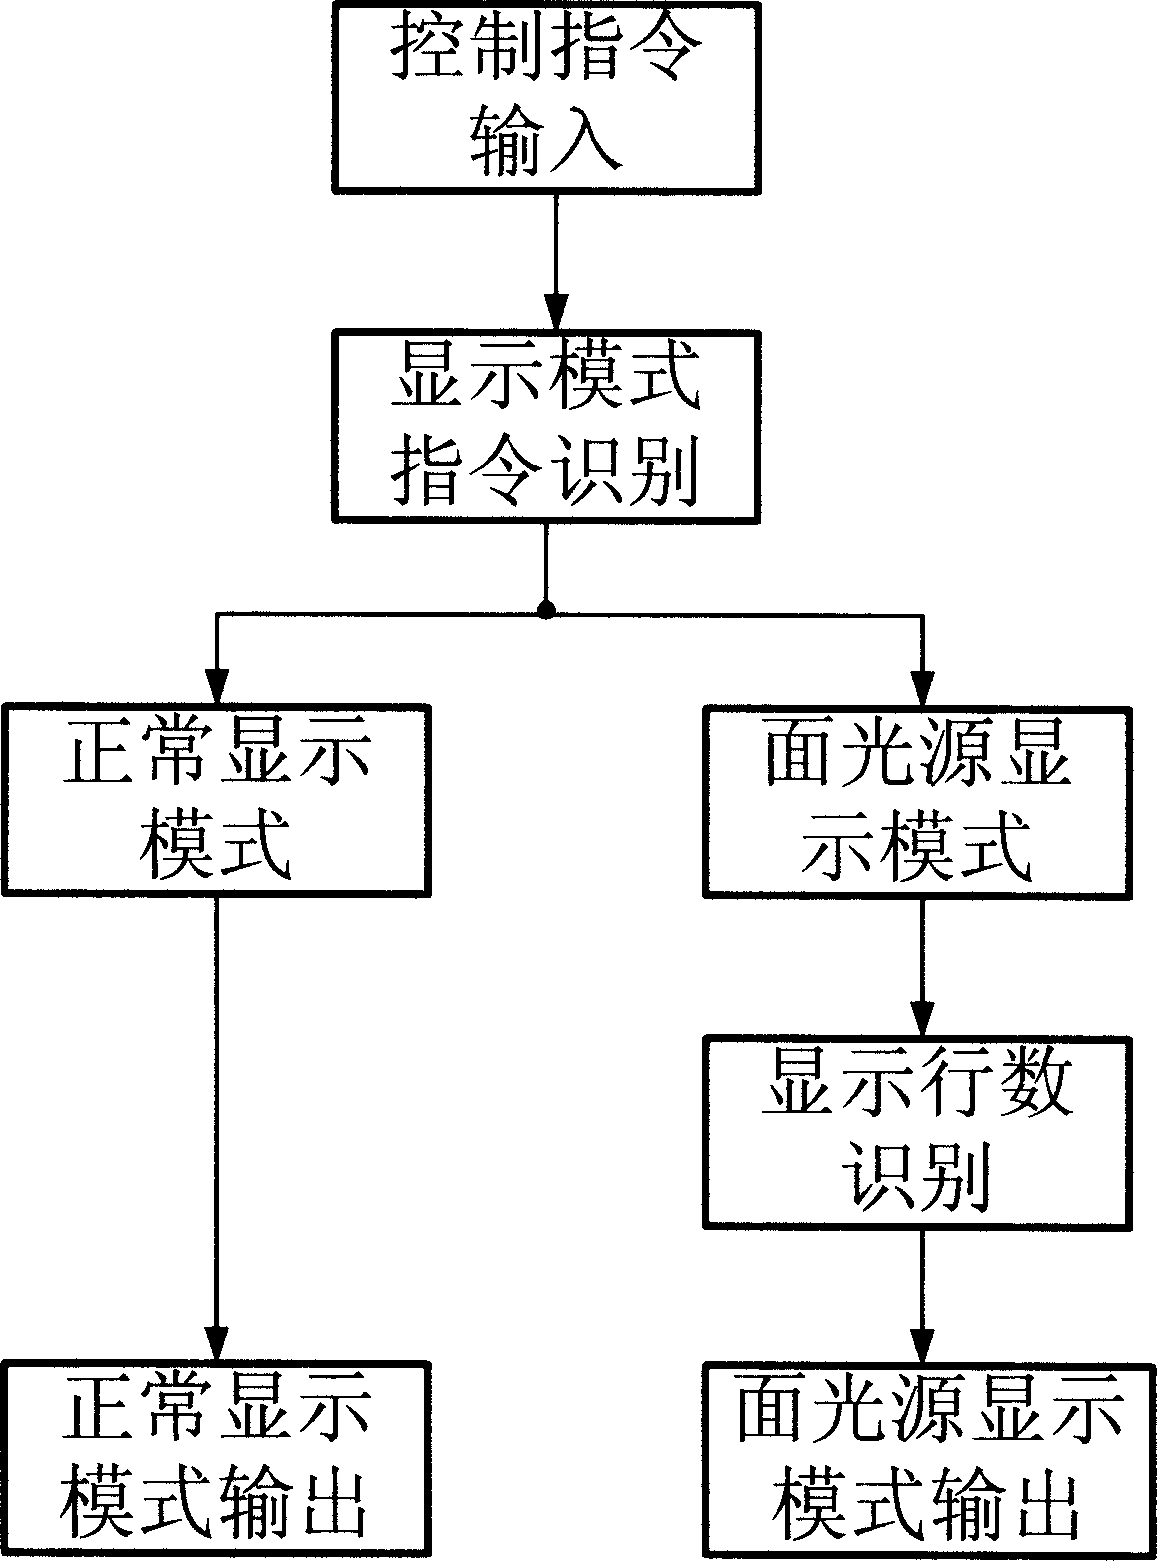 Display drive method for passive OLED mobile terminal capable of being used as surface light source